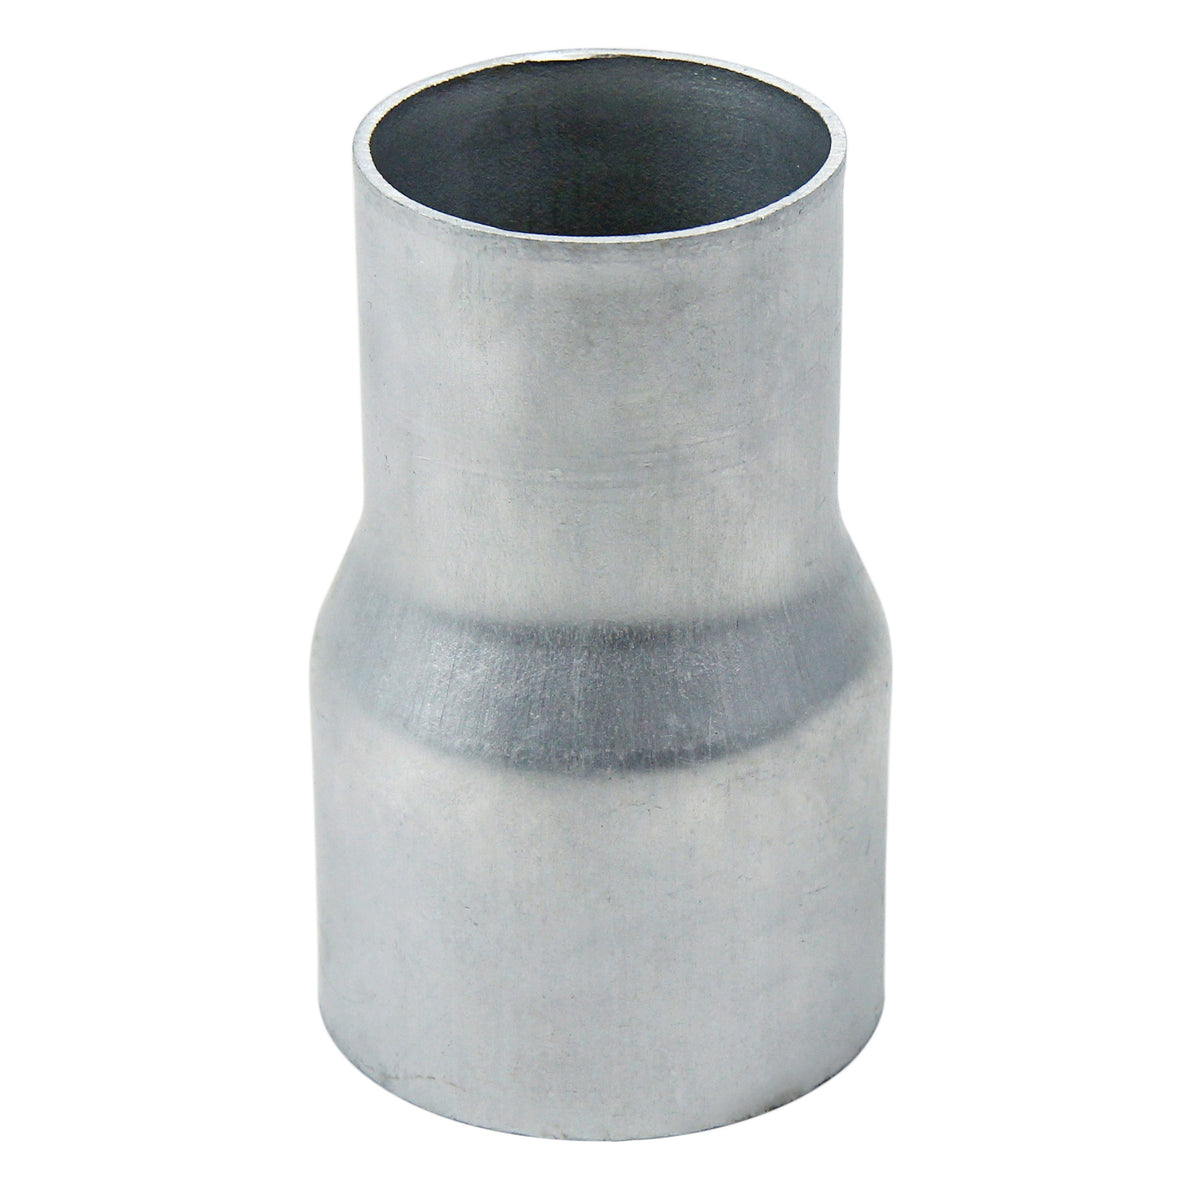 HPS 1.75 inch OD to 1.75 inch ID, 6061 Aluminum Slip Fit Transition Reducer Tube Joiner, 4 inch Long